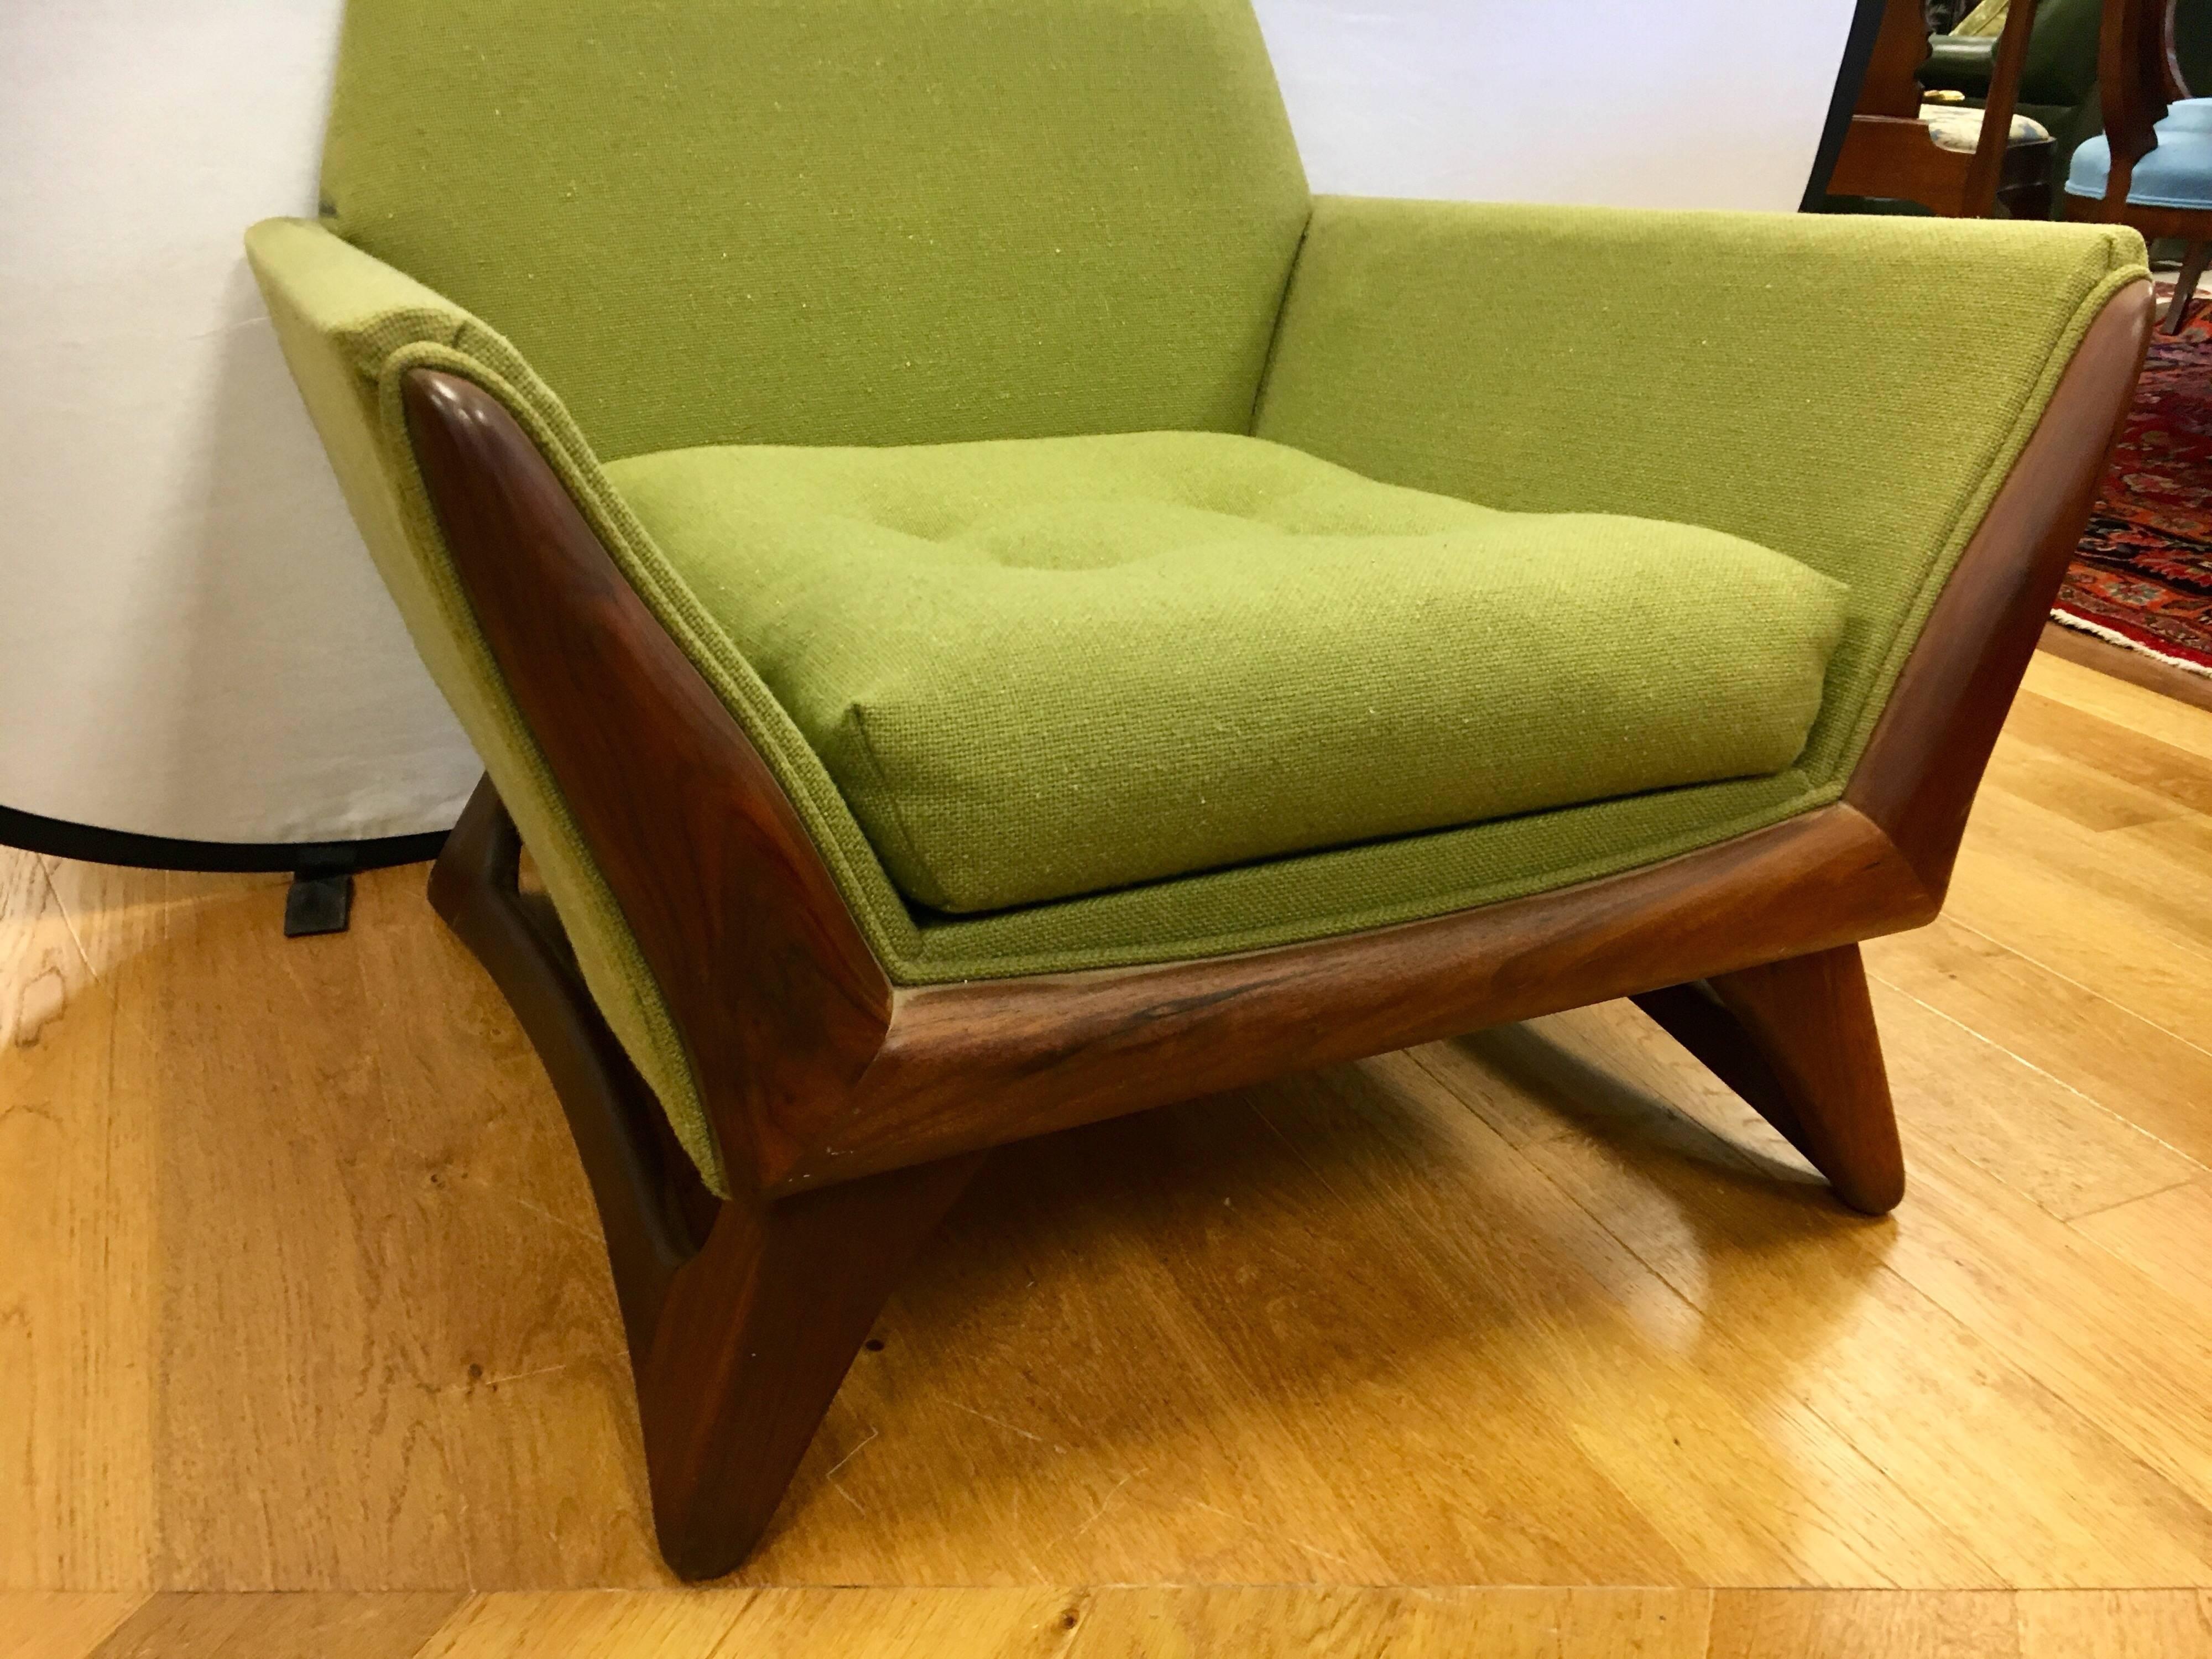 Stunning, all original and in excellent condition Adrian Pearsall lounge chair for Craft Associates.
What sets this piece apart from other Pearsall classics is the stellar condition the piece is in.
All original and both walnut and fabric are